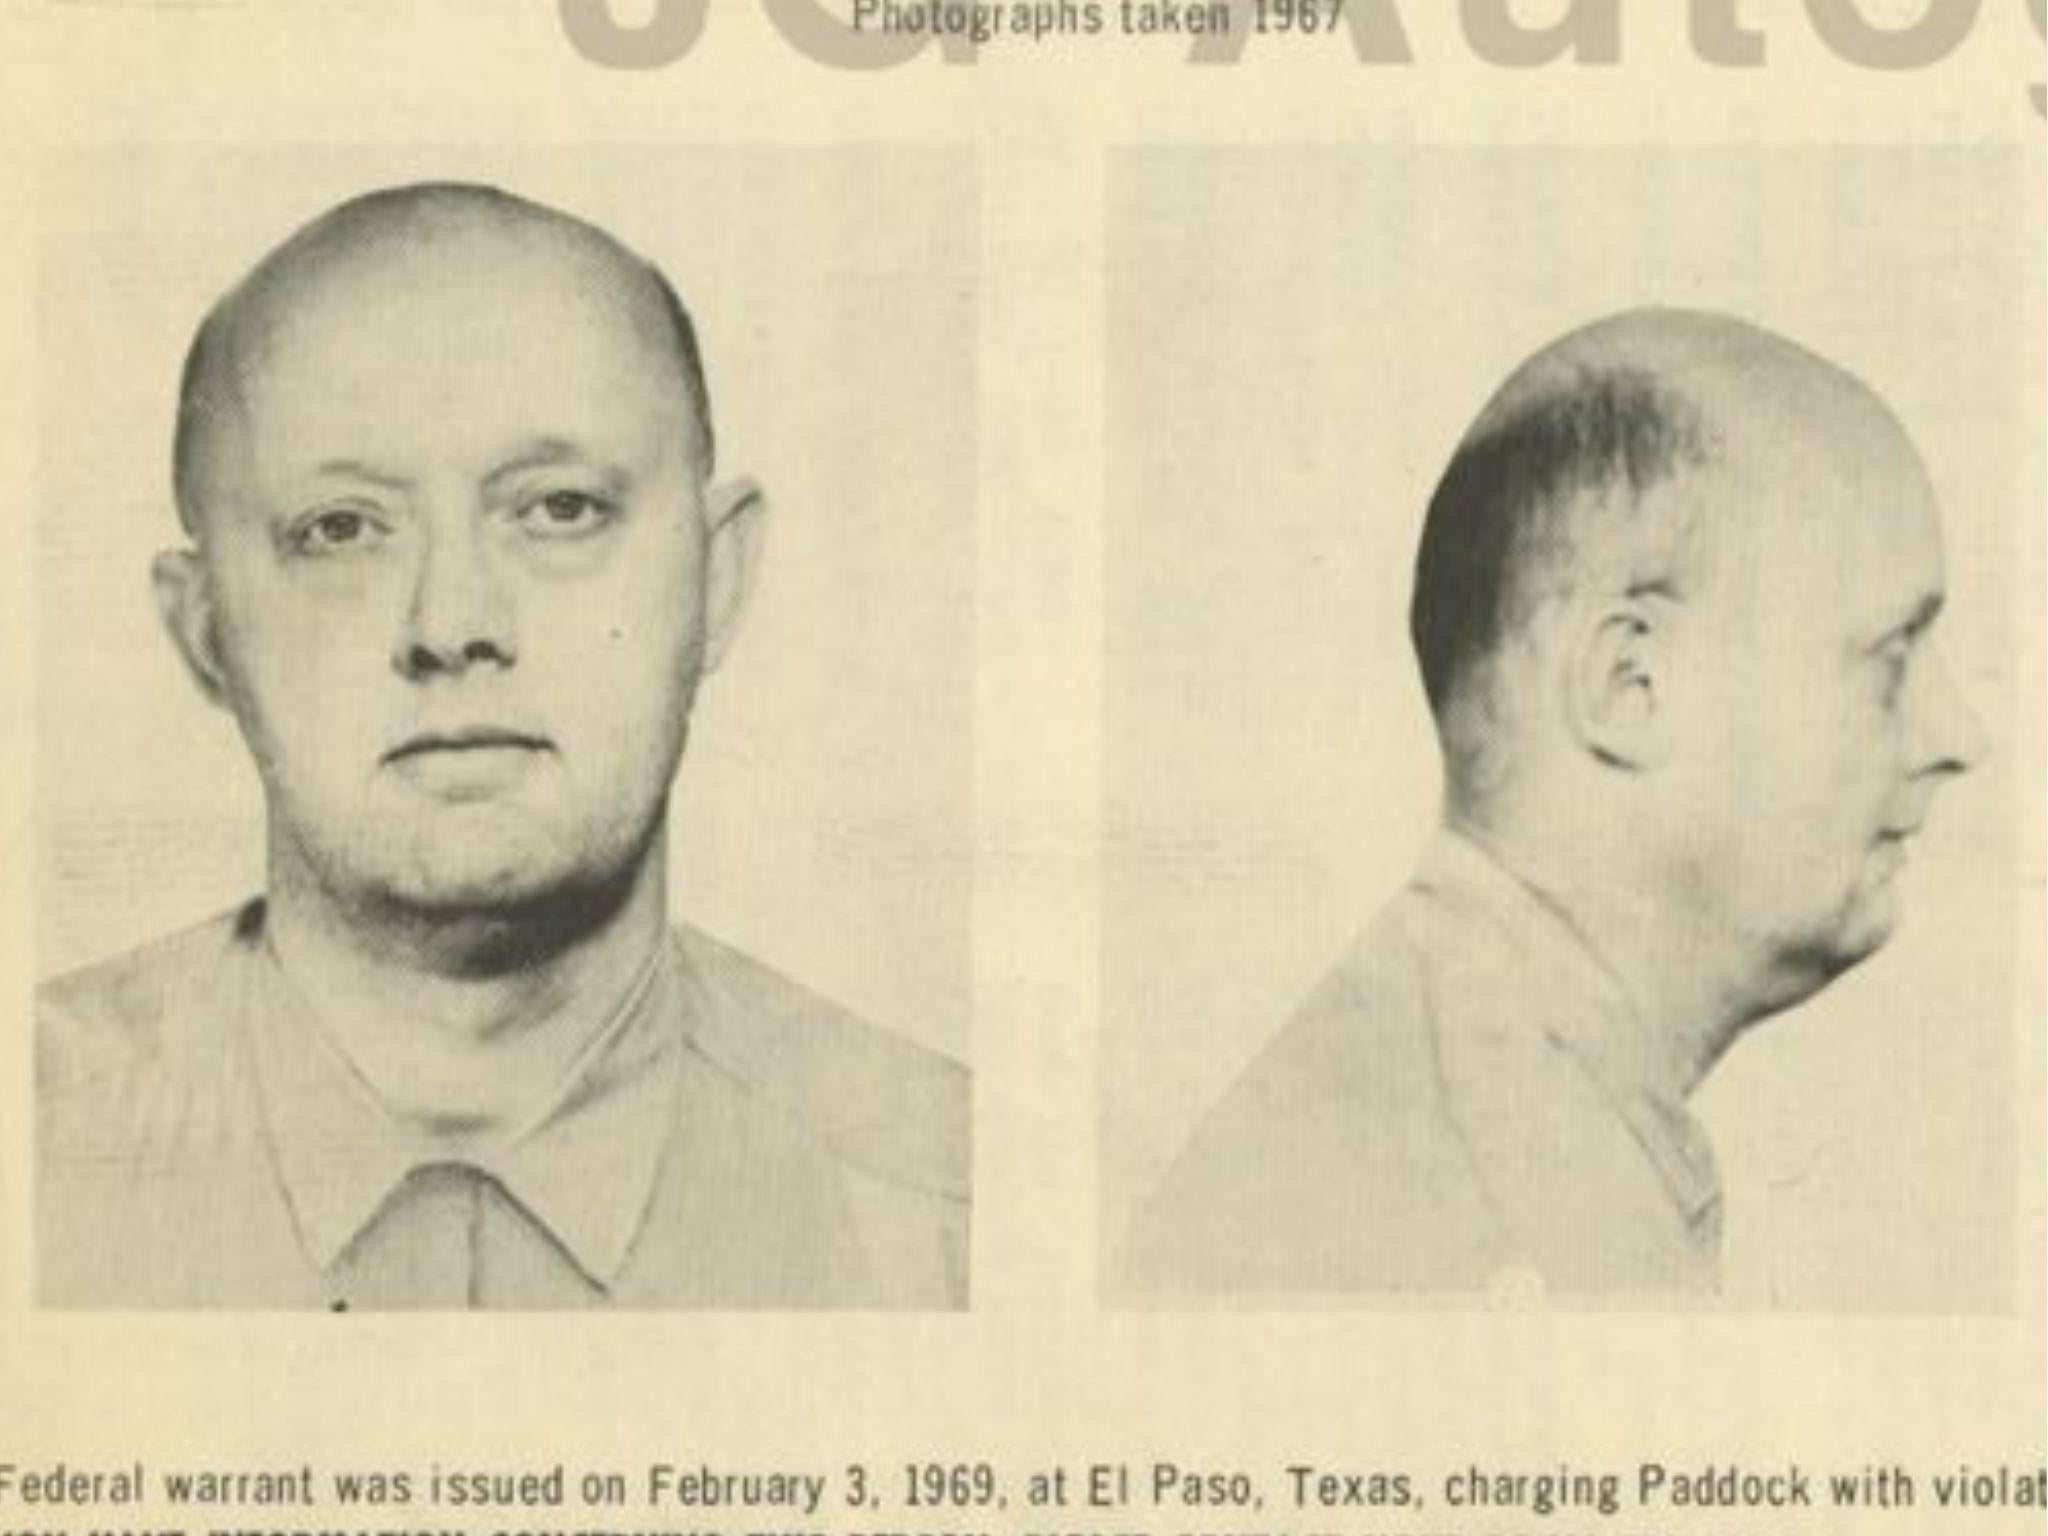 Stephen Paddock's father was on FBI's 10 most wanted list | The Independent